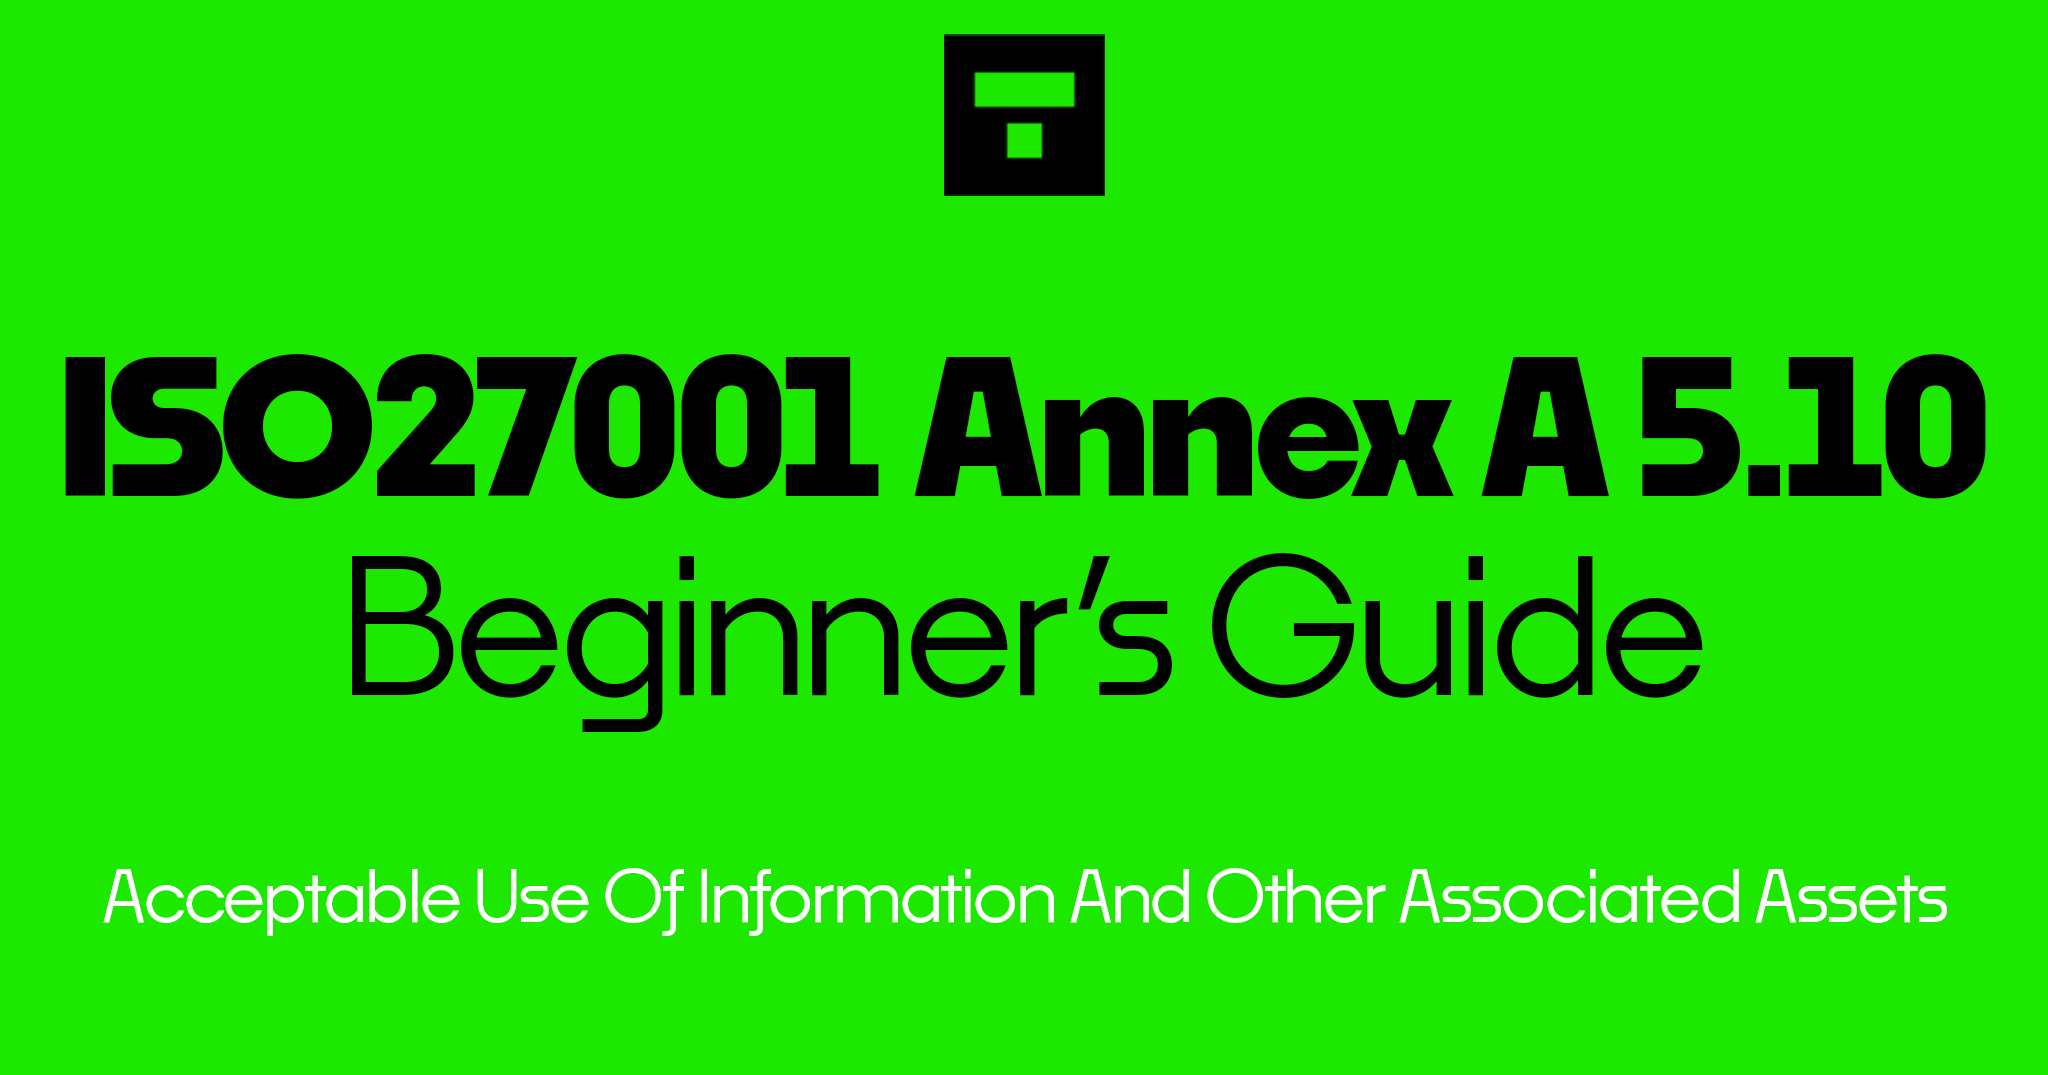 How To Implement ISO 27001 Annex A 5.10 Acceptable Use Of Information And Other Associated Assets